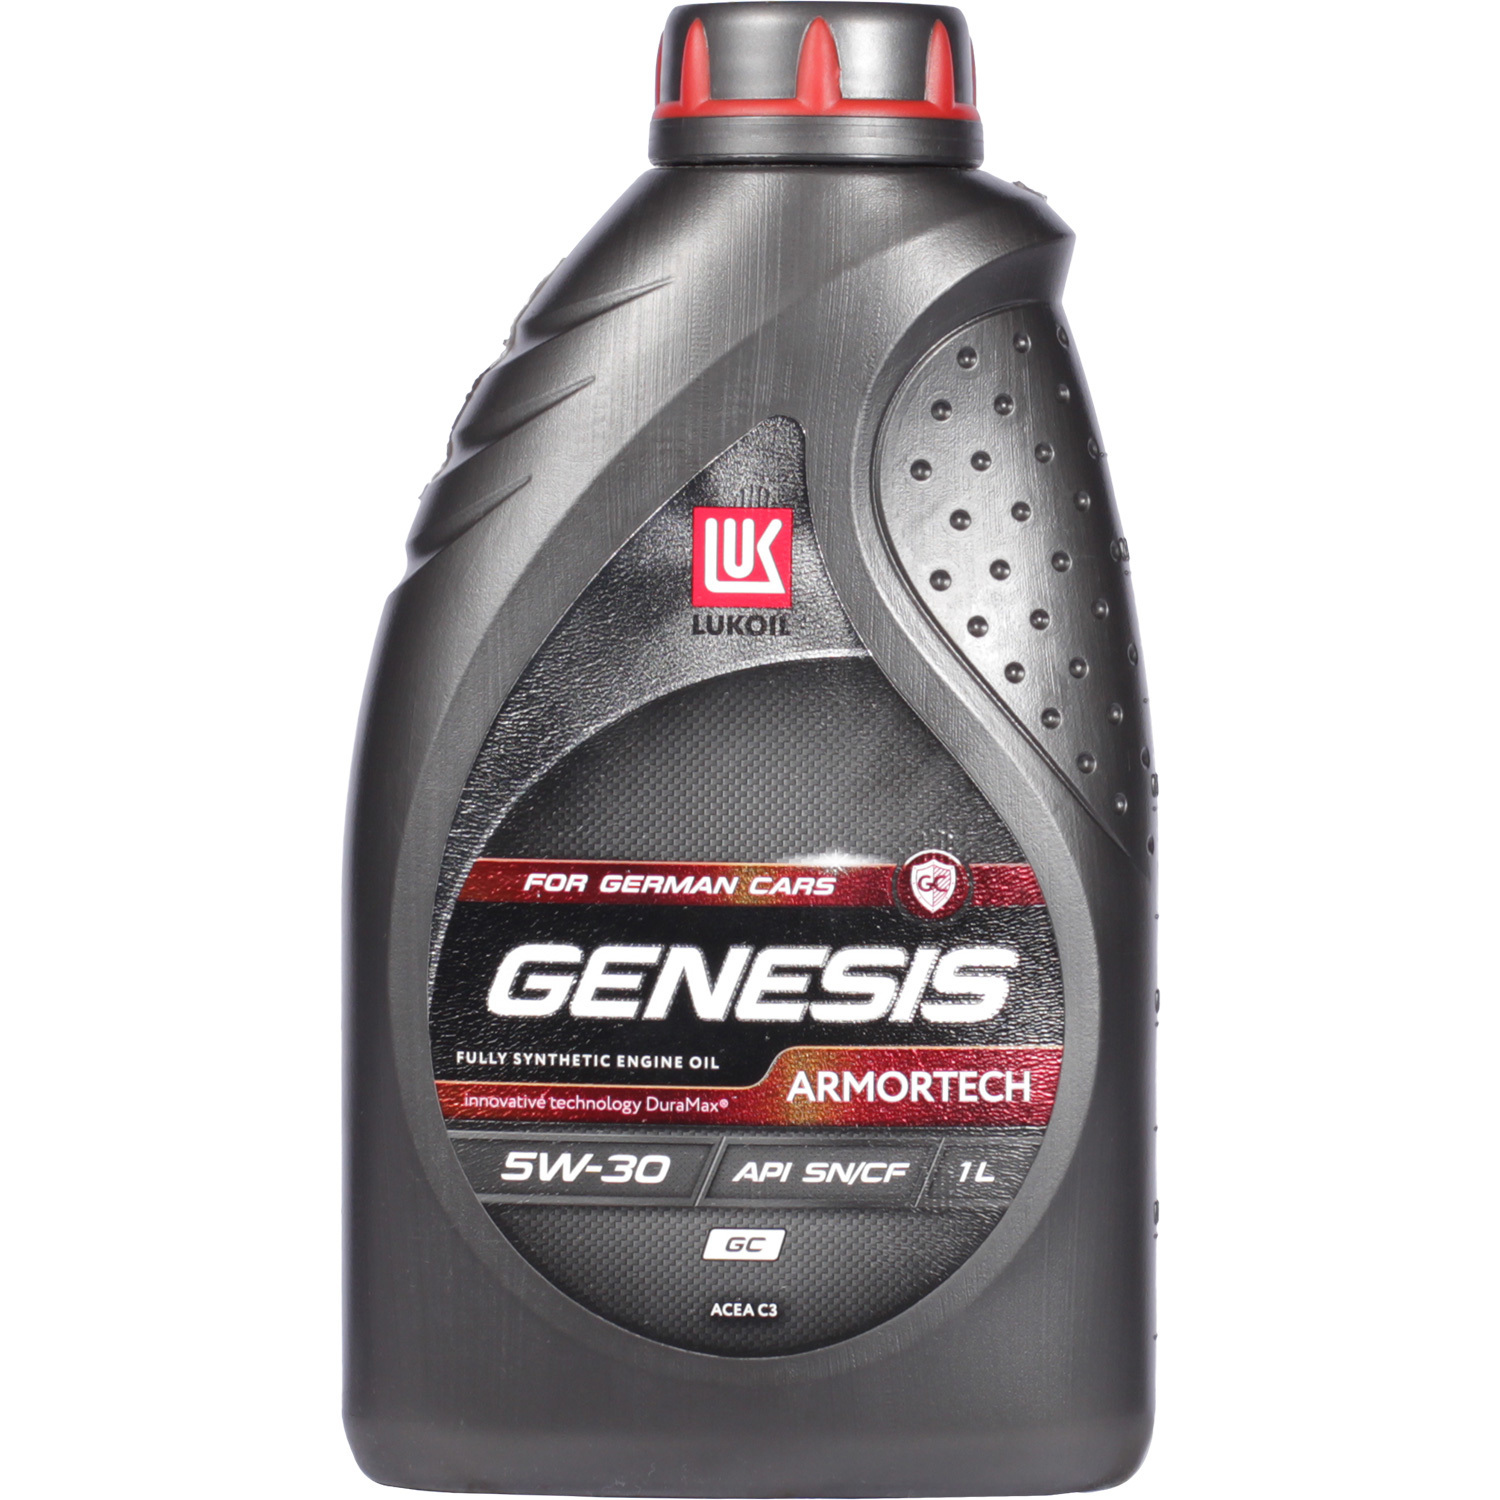 Lukoil Моторное масло Lukoil Genesis Armortech GC 5W-30, 1 л lukoil моторное масло lukoil genesis armortech hk 5w 30 1 л